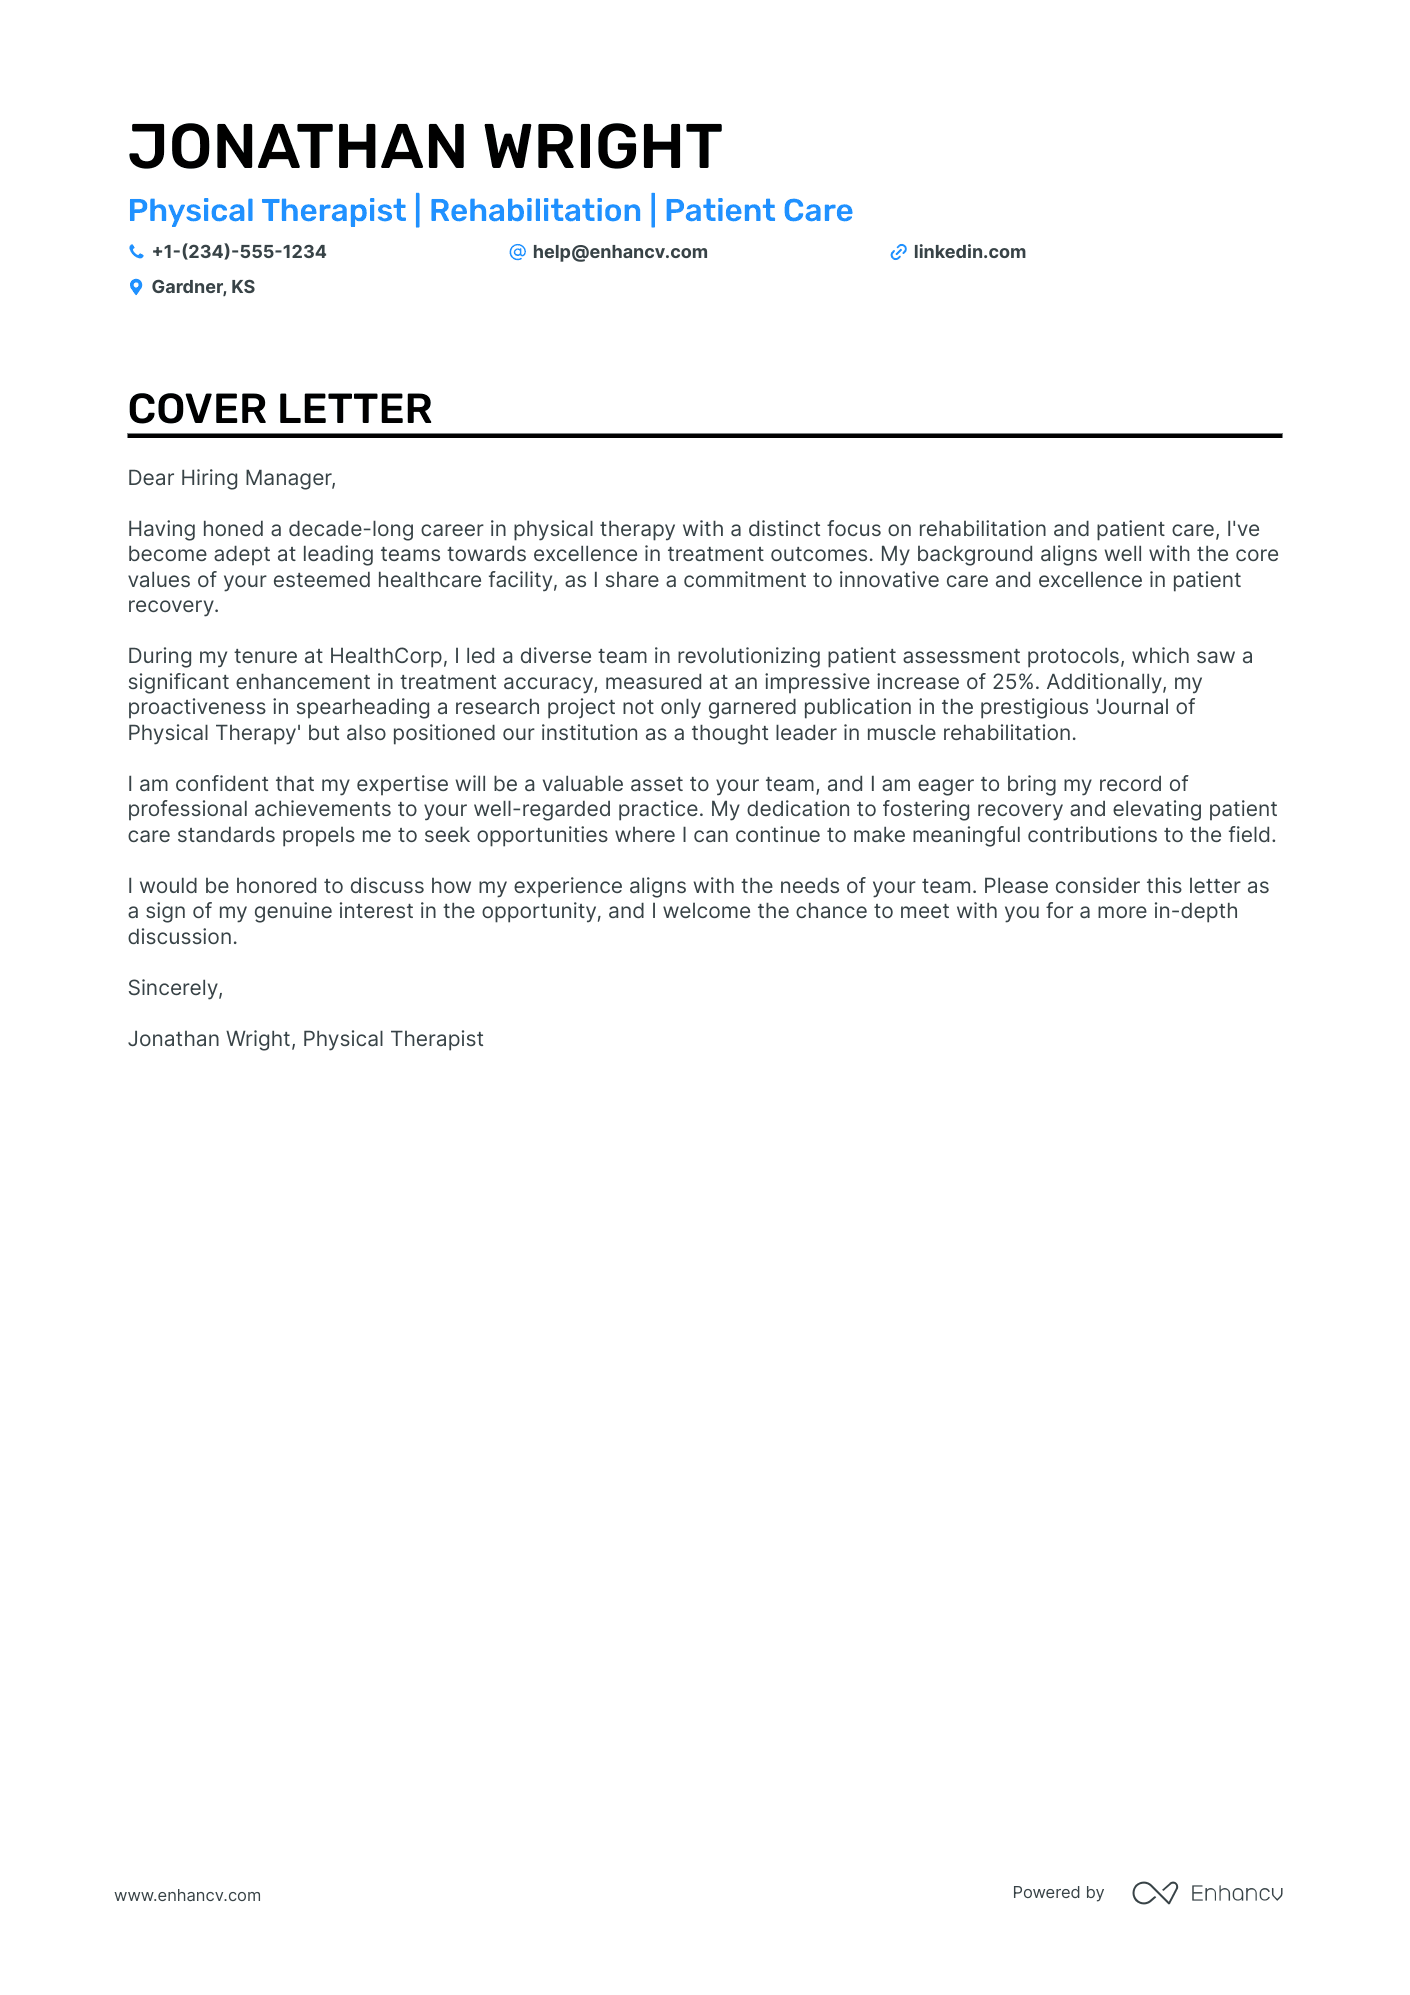 Physical Therapist cover letter